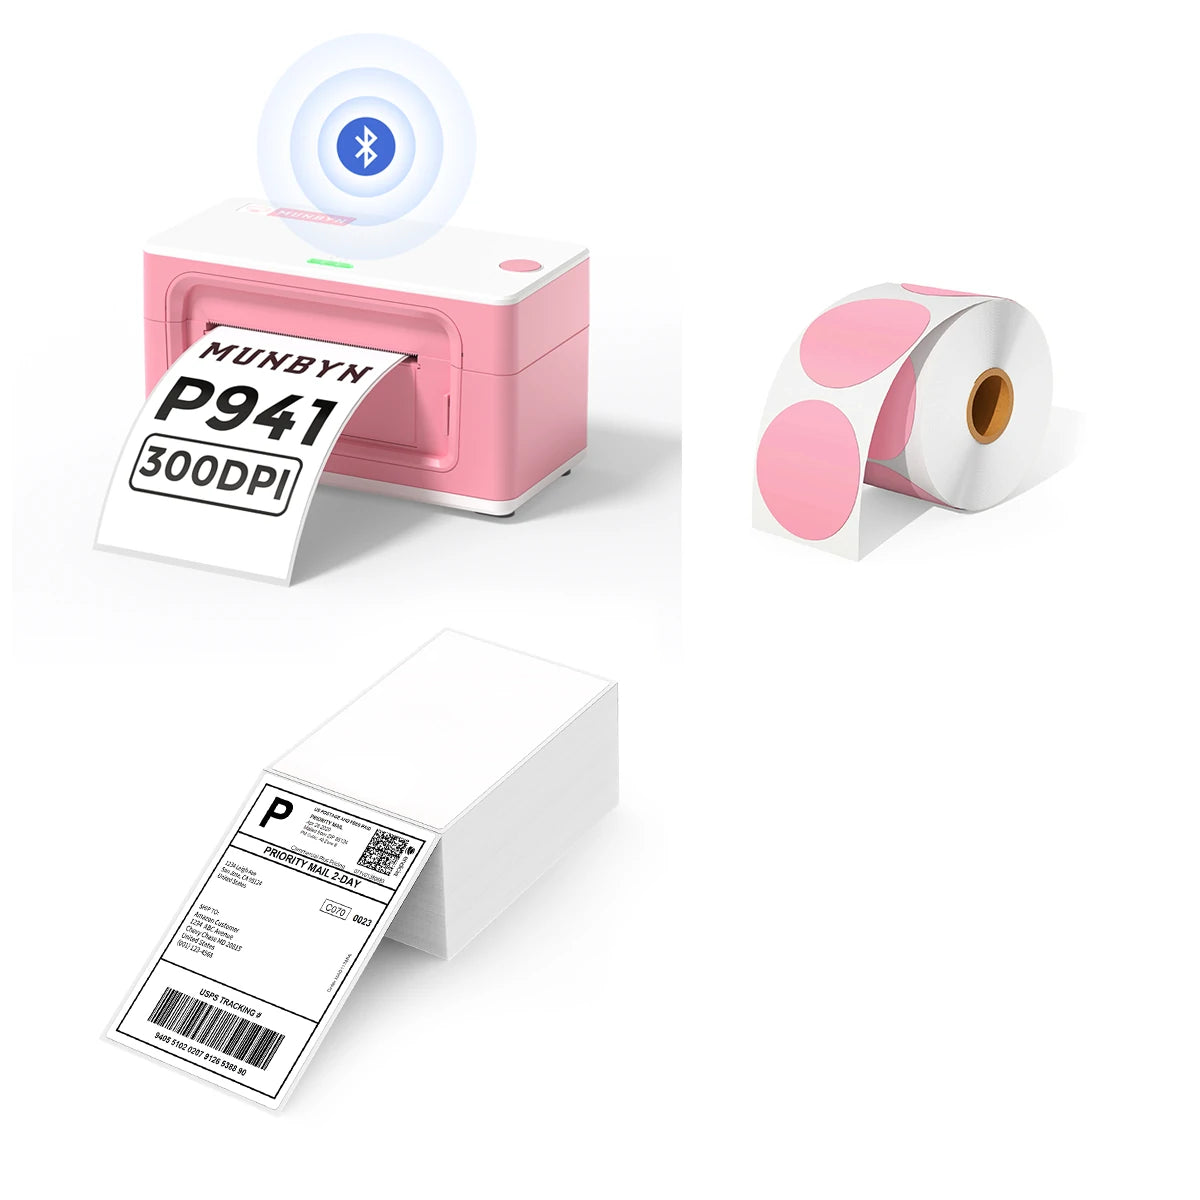 MUNBYN P941B pink Bluetooth Thermal Label Printer Kit includes a pink Bluetooth label printer, a roll of pink circle labels, and a stack of shipping labels.